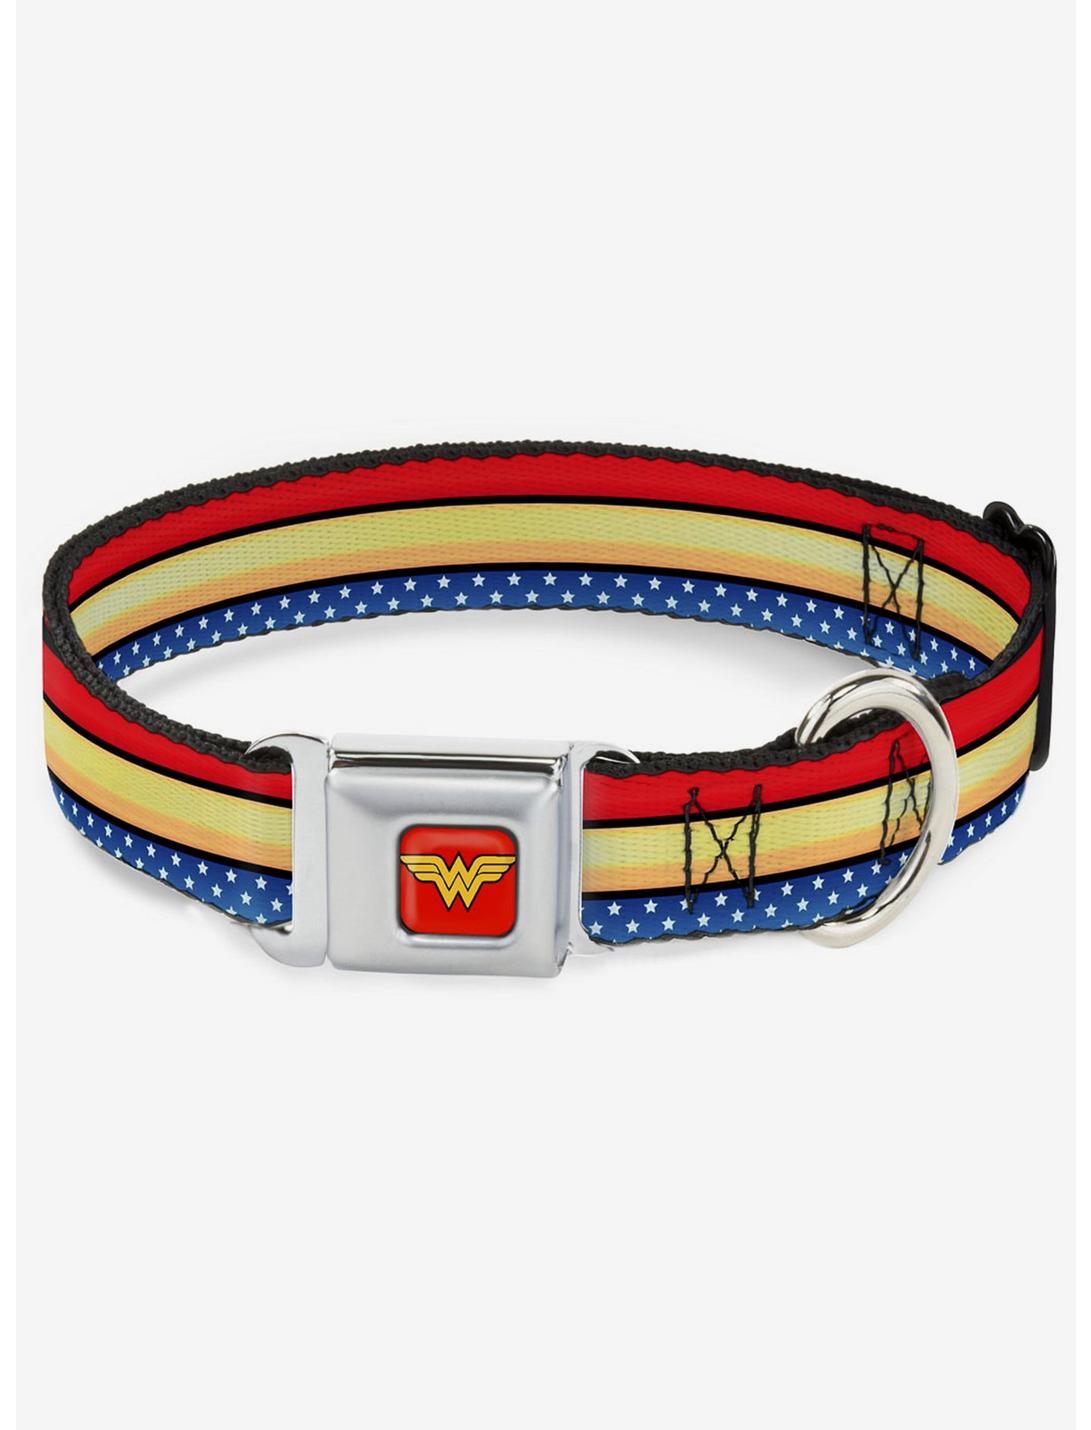 DC Comics Justice League Wonder Woman Stripe Stars Red Gold Blue White Seatbelt Buckle Dog Collar, RED, hi-res